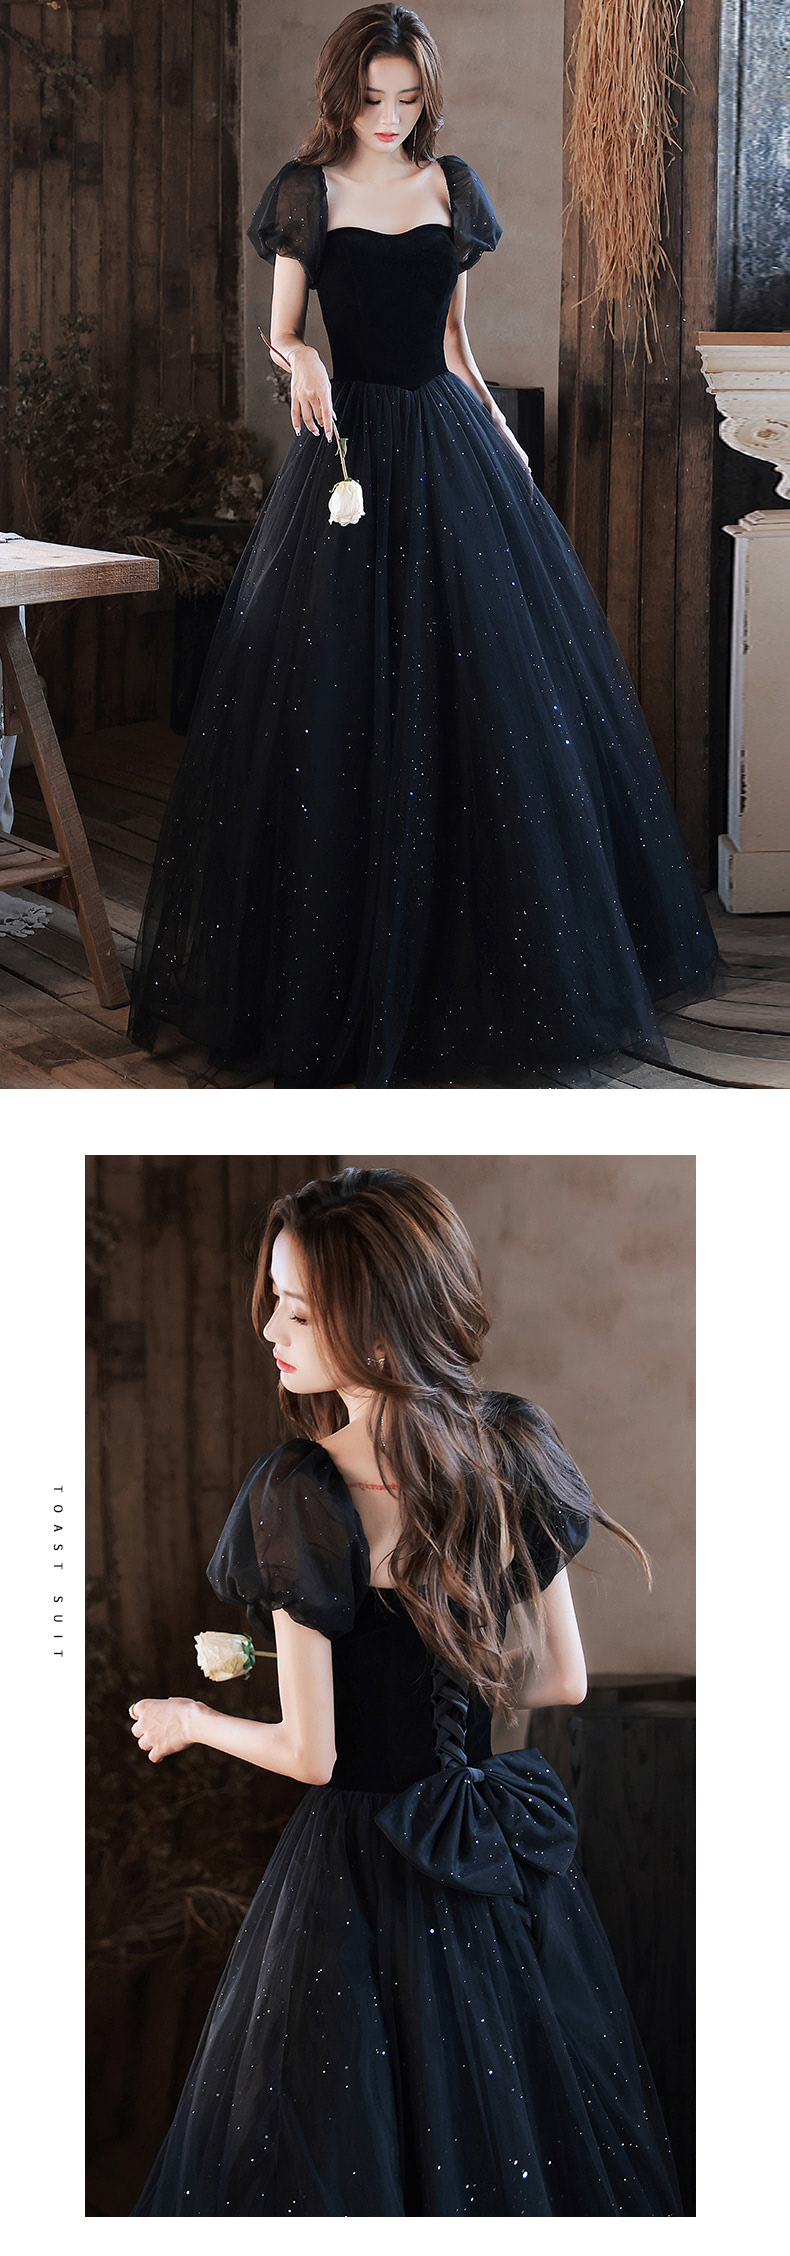 Black-Prom-Evening-Maxi-Dress-Homecoming-Outfit-with-Bowknot15.jpg